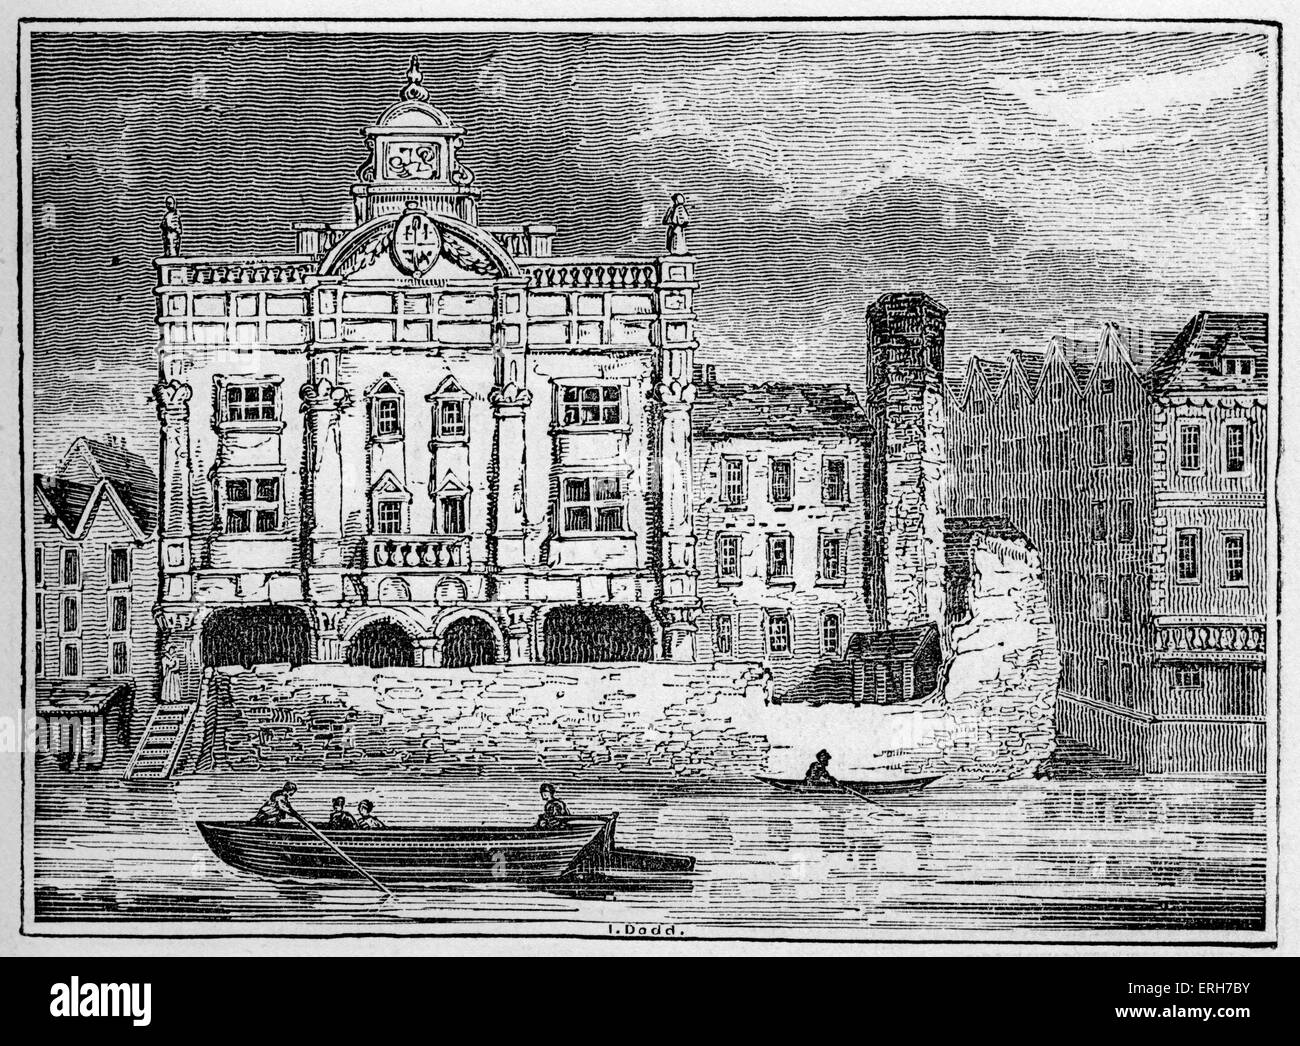 Duke's Theatre, Dorset Gardens, Whitefriars, London - view overlooking the Thames. Note the landing place was visitors Stock Photo